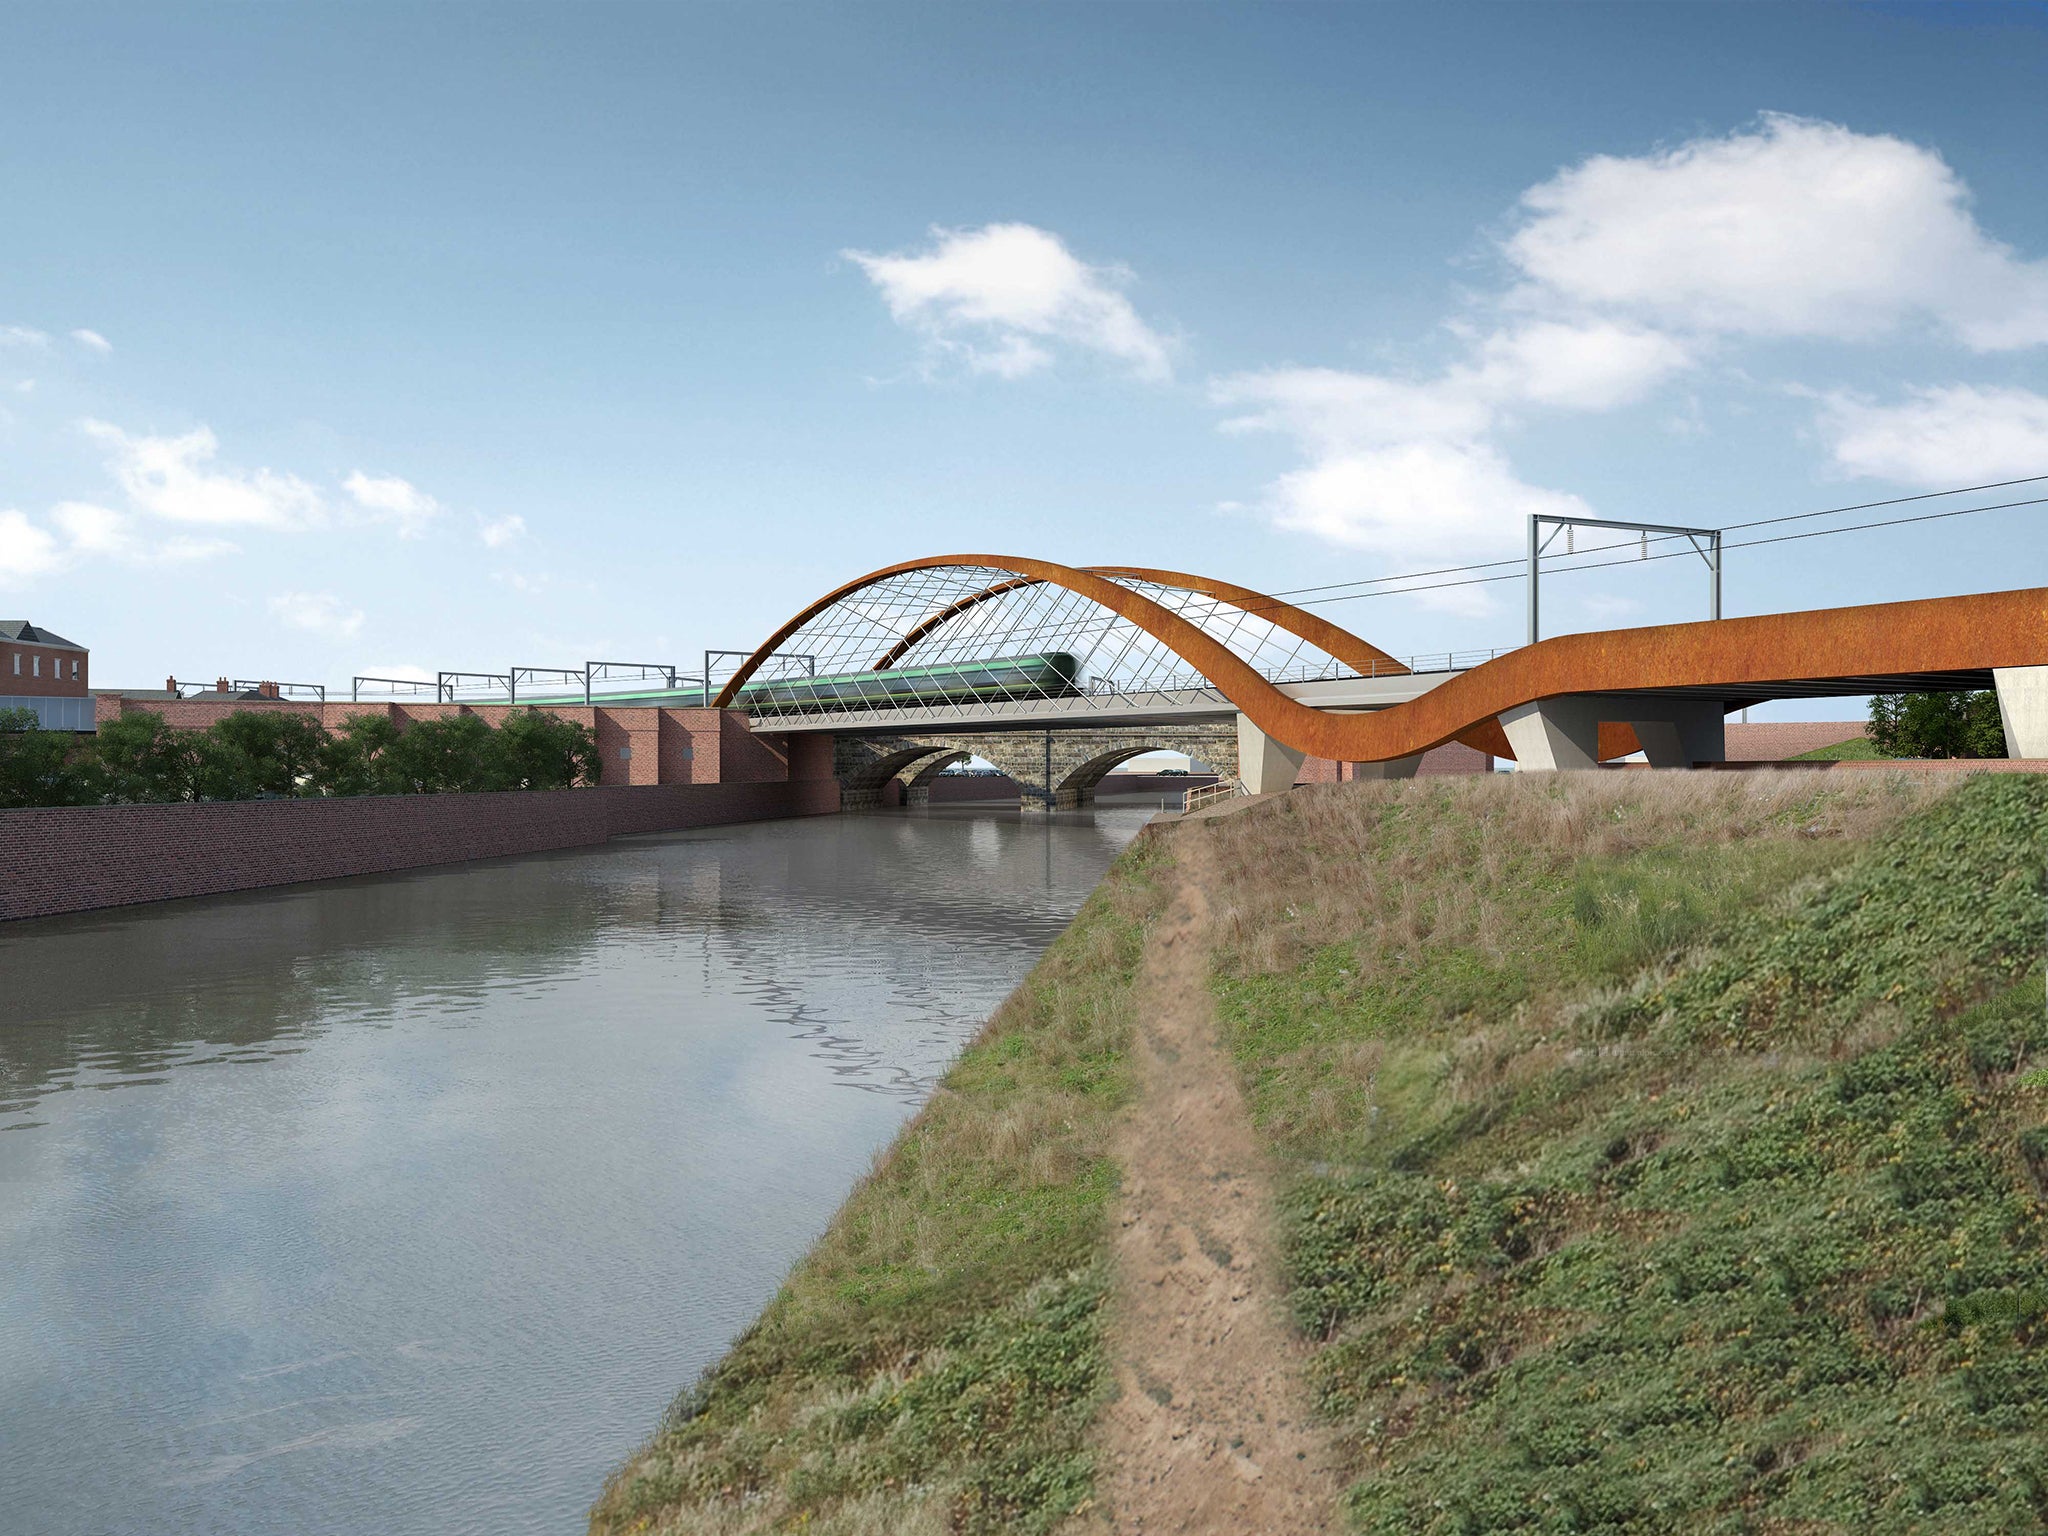 Artist's impression of the Ordsall Chord